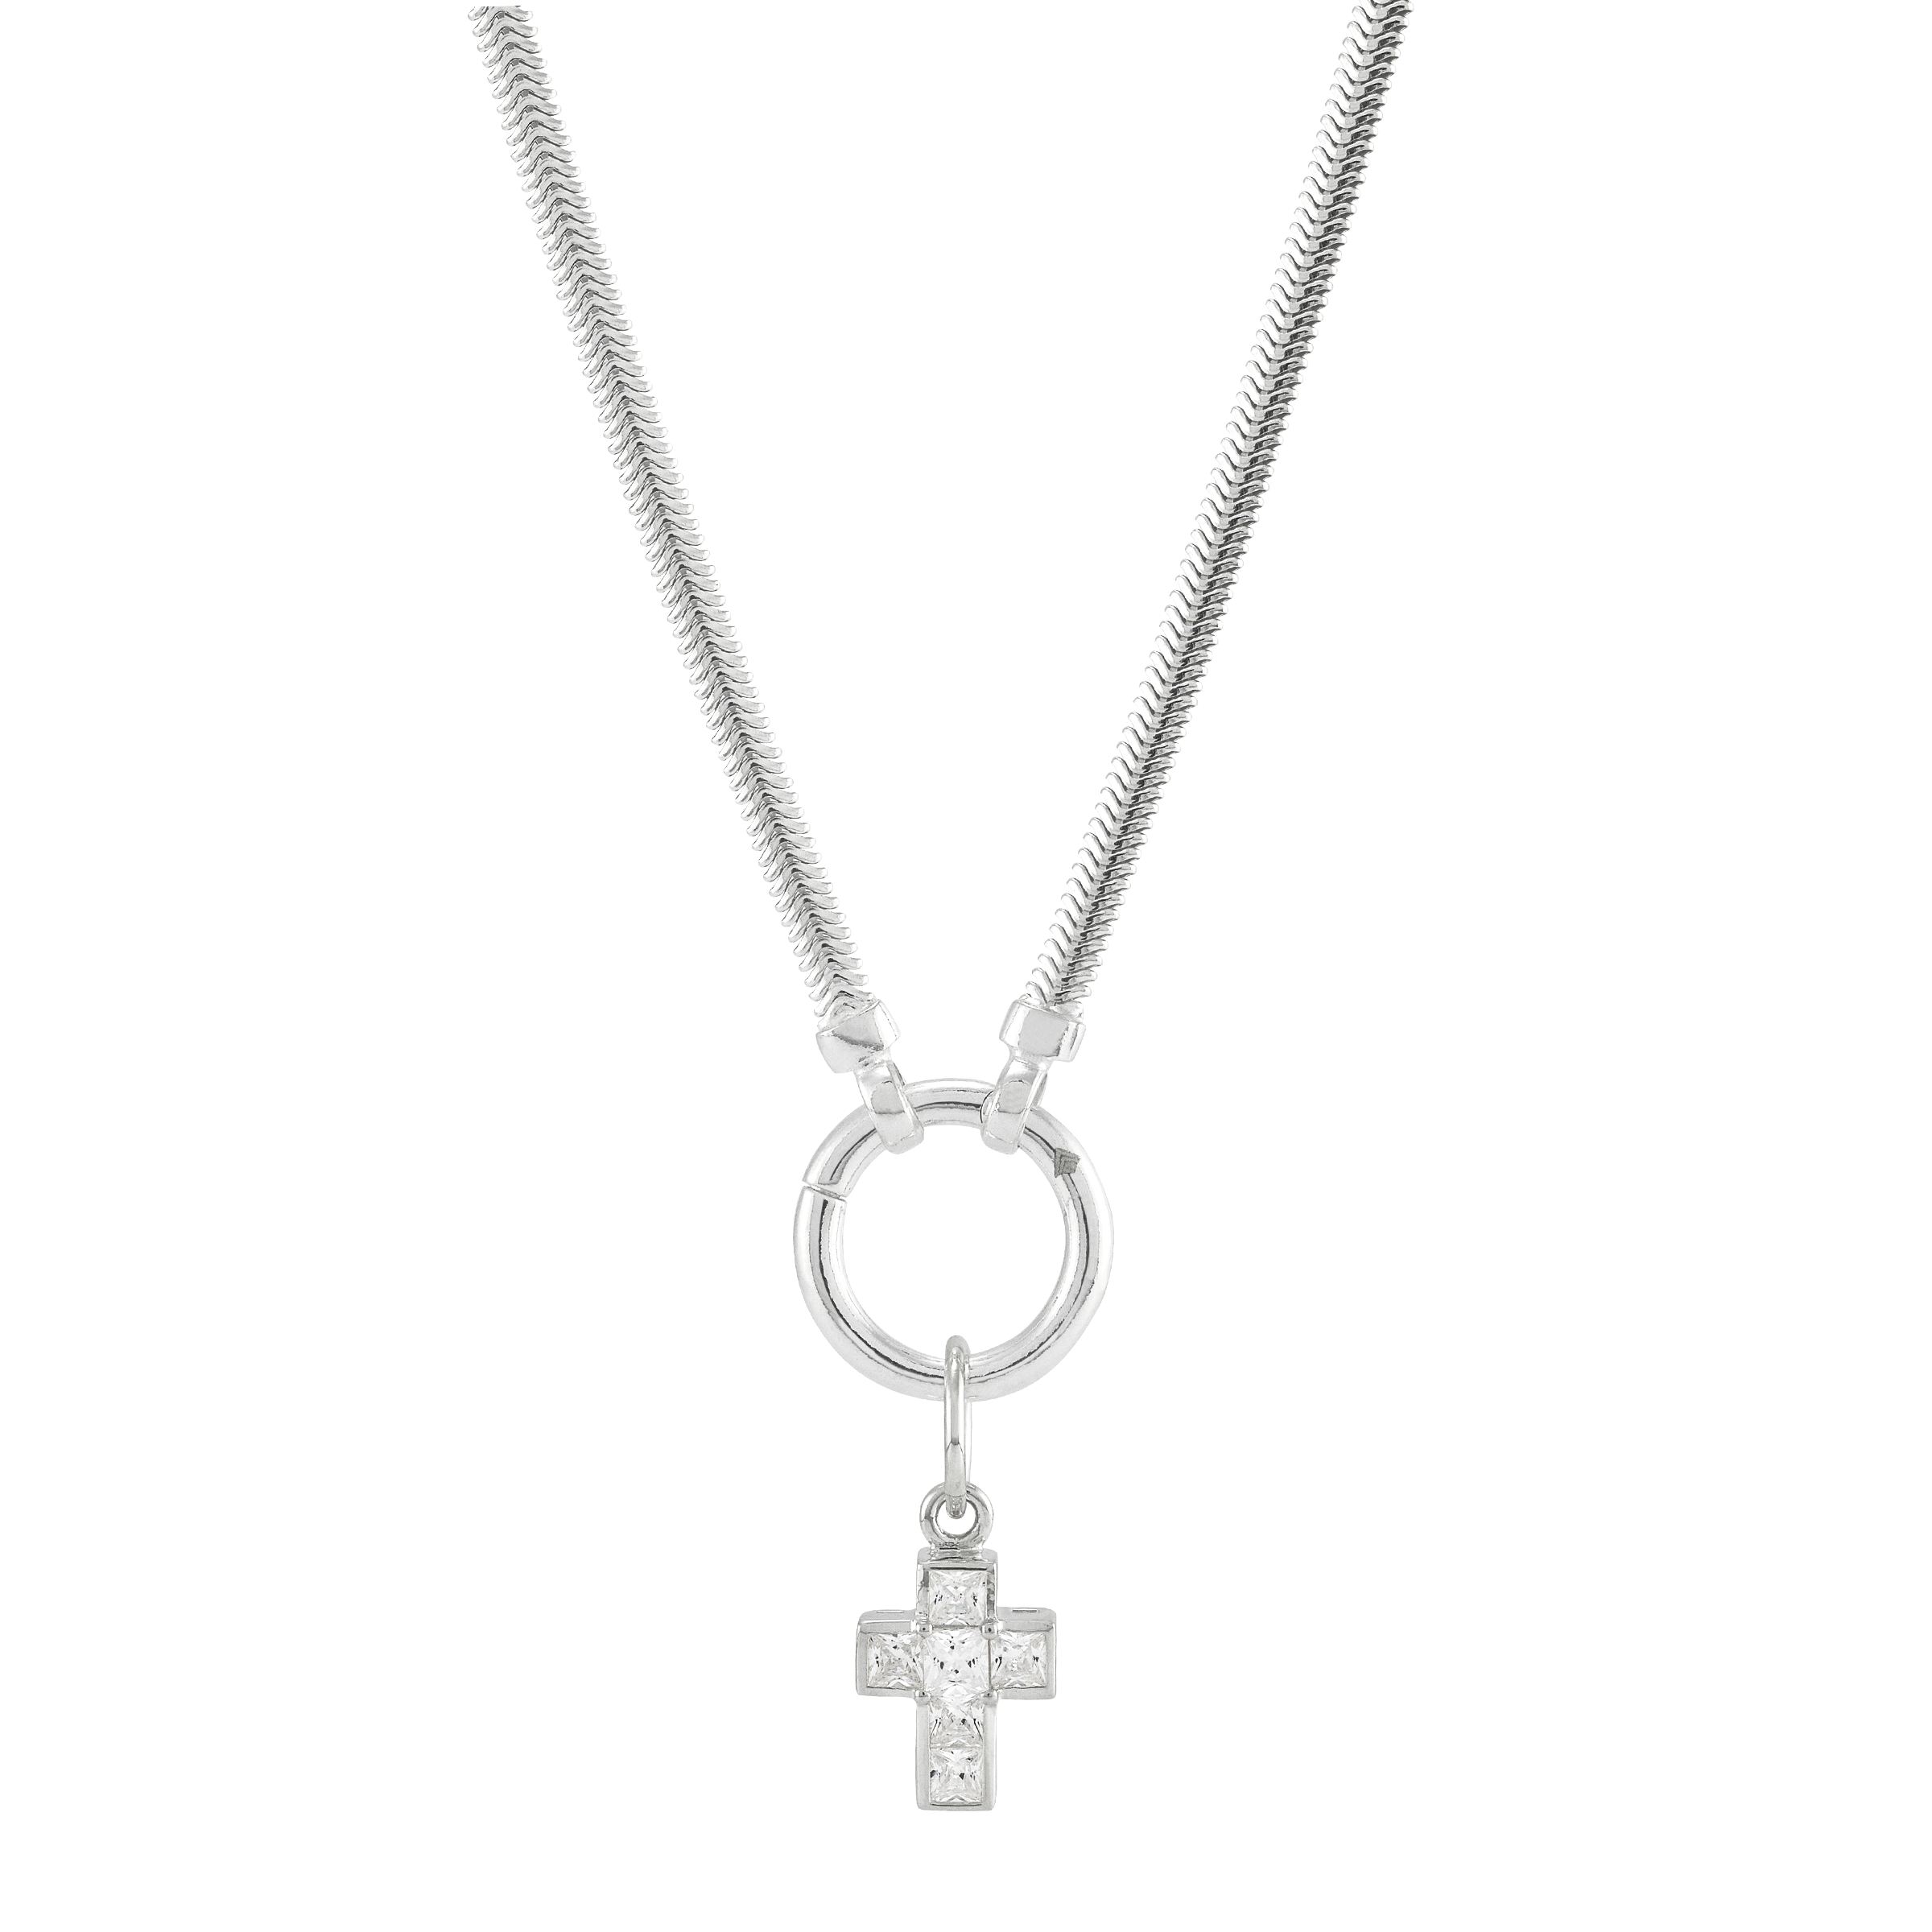 Silpada 'Lock, Stock and Barrel' Necklace in Sterling Silver, 14